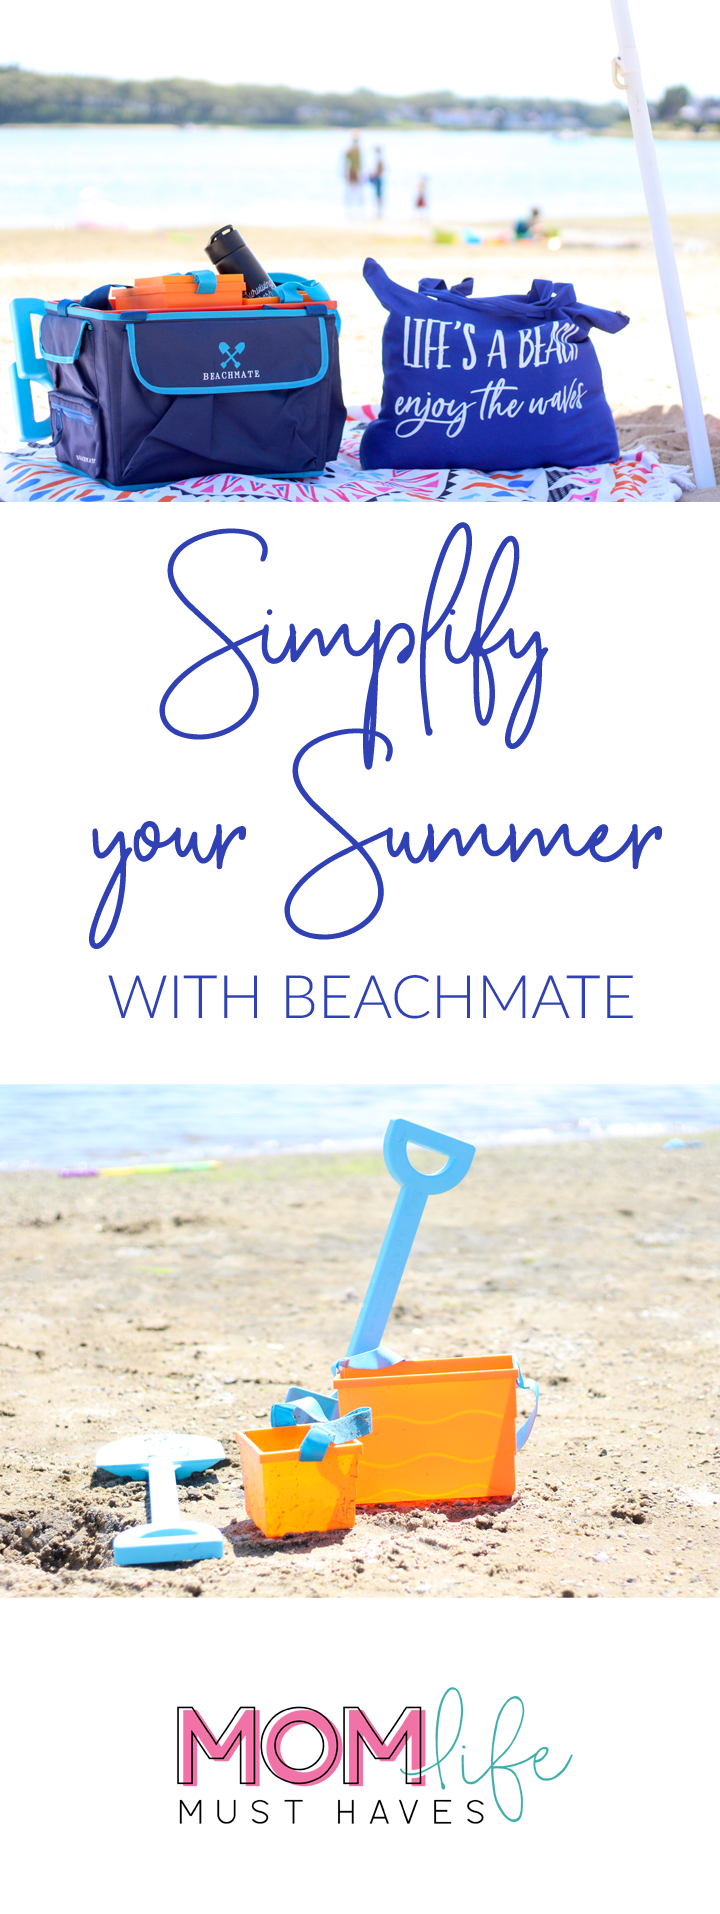 Simplify your summer with beachmate and mom life must haves || More summer fun at momlifemusthaves.com